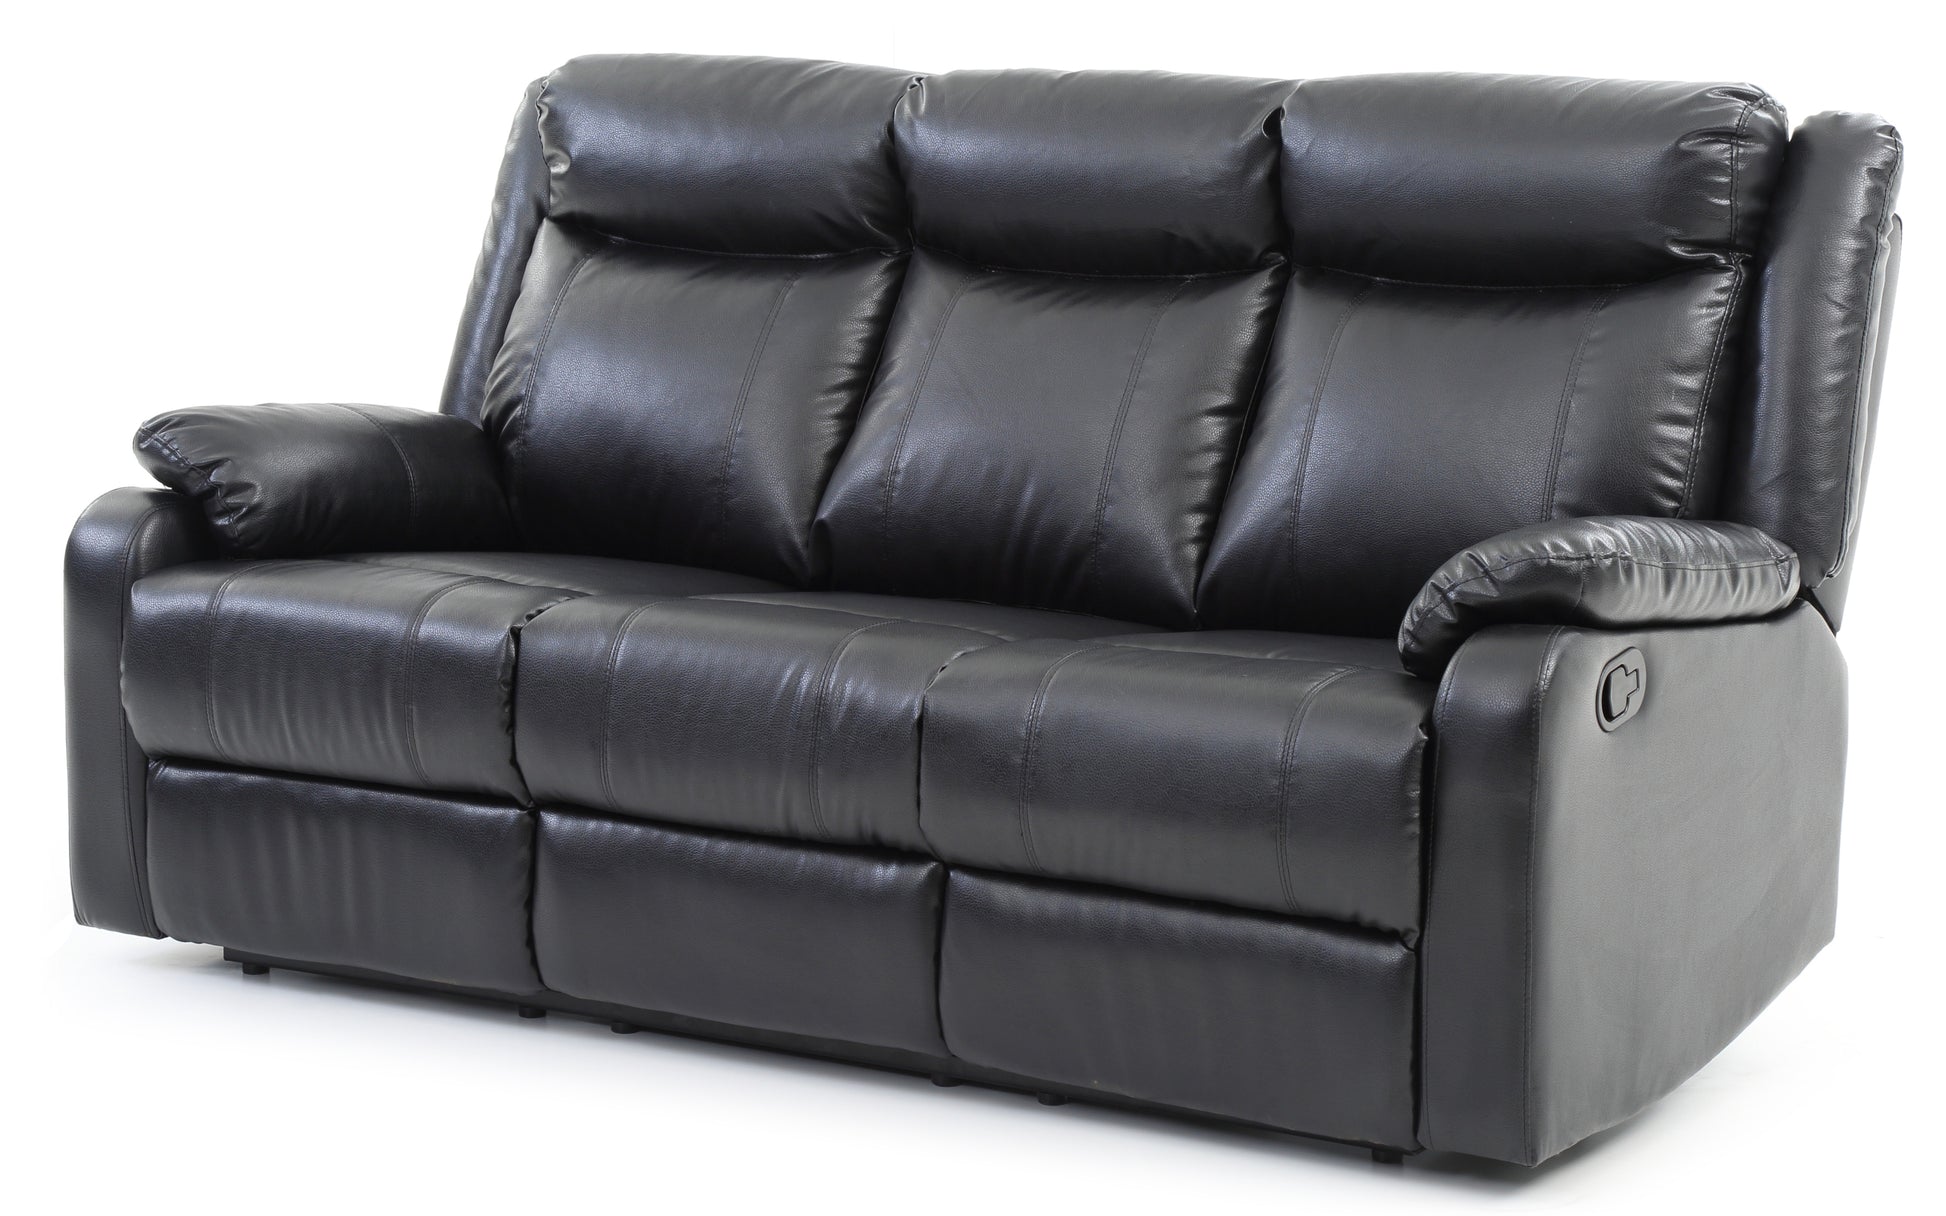 Glory Furniture Ward G761A-RS Double Reclining Sofa , BLACK - Enova Luxe Home Store